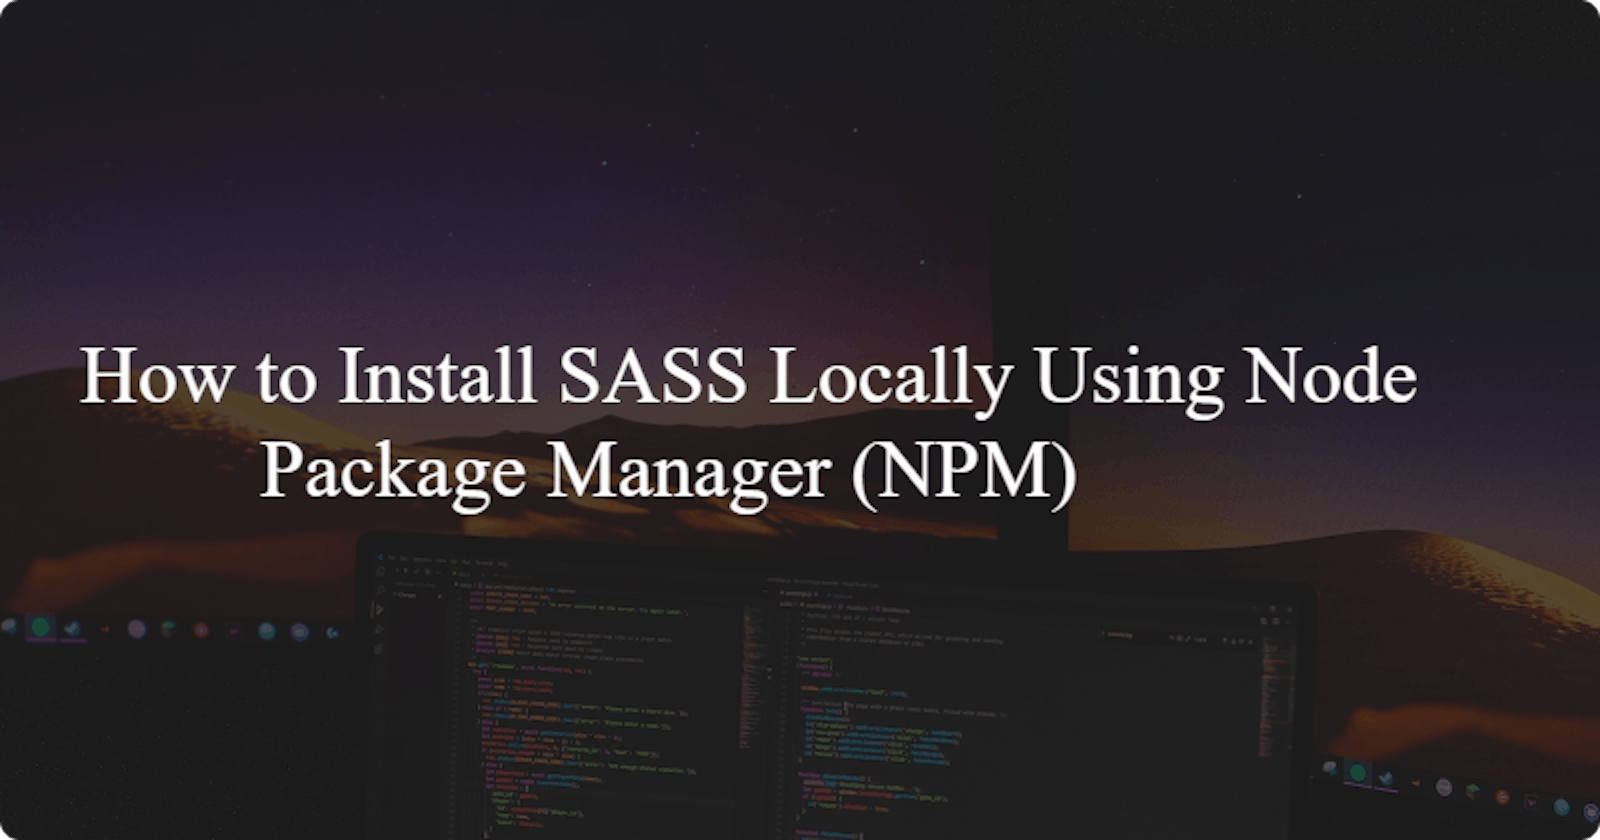 How to Install SASS Locally Using Node Package Manager (NPM)